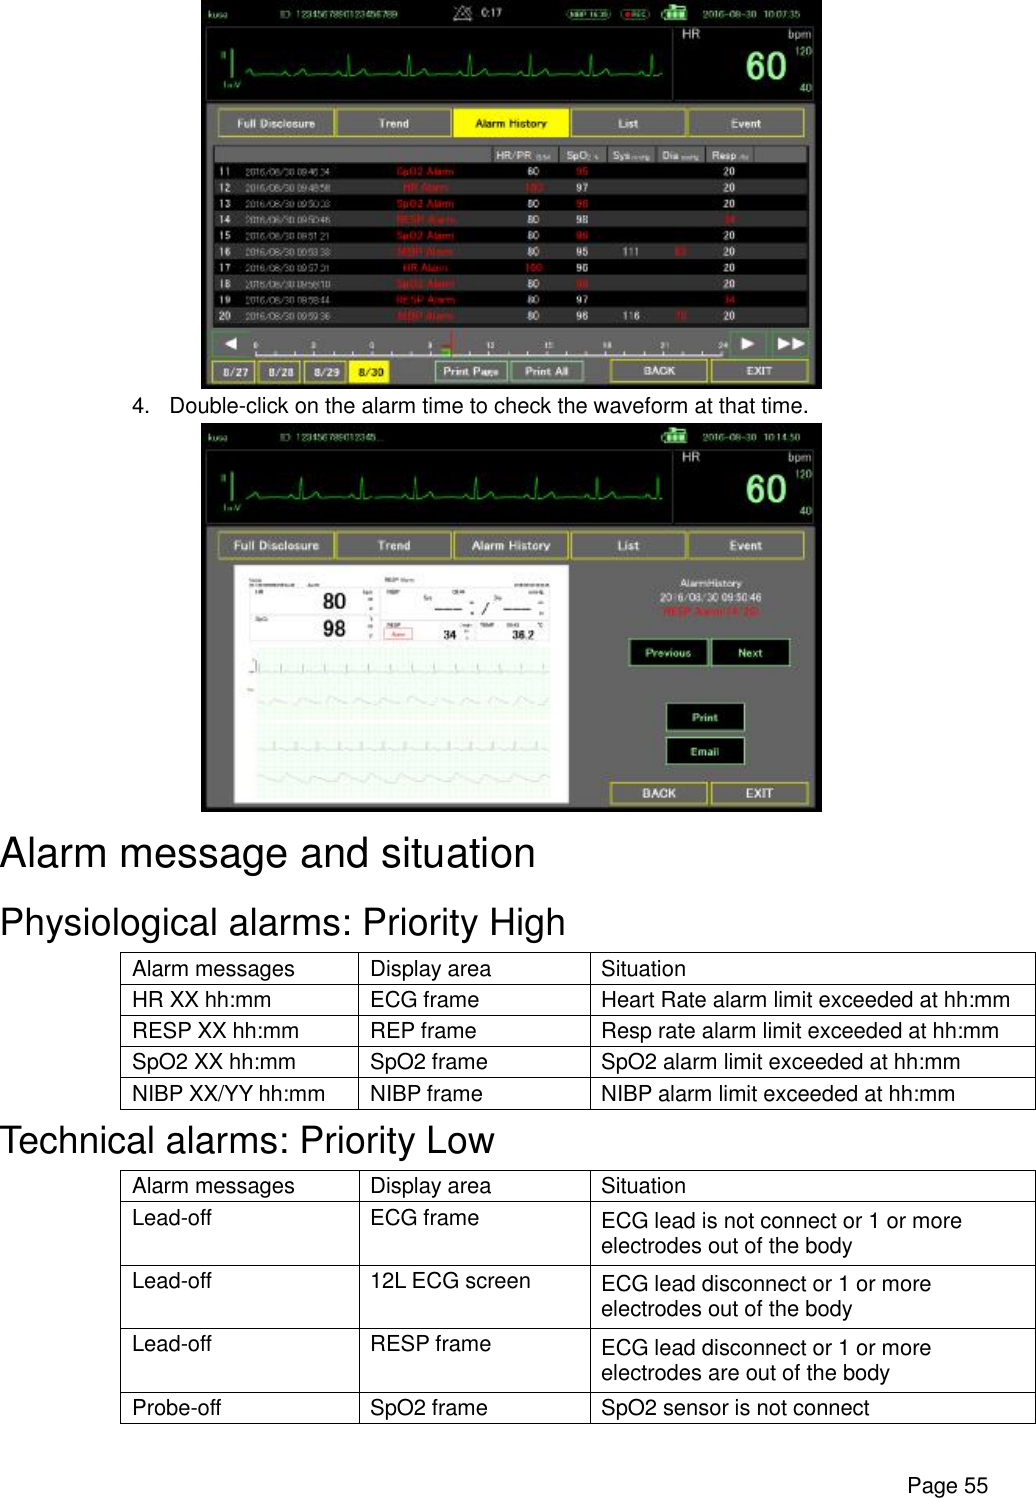      Page 55  4. Double-click on the alarm time to check the waveform at that time.  Alarm message and situation Physiological alarms: Priority High Alarm messages  Display area  Situation HR XX hh:mm  ECG frame  Heart Rate alarm limit exceeded at hh:mm RESP XX hh:mm  REP frame  Resp rate alarm limit exceeded at hh:mm SpO2 XX hh:mm  SpO2 frame  SpO2 alarm limit exceeded at hh:mm NIBP XX/YY hh:mm  NIBP frame  NIBP alarm limit exceeded at hh:mm Technical alarms: Priority Low Alarm messages  Display area  Situation Lead-off  ECG frame  ECG lead is not connect or 1 or more electrodes out of the body Lead-off  12L ECG screen  ECG lead disconnect or 1 or more electrodes out of the body Lead-off  RESP frame  ECG lead disconnect or 1 or more electrodes are out of the body Probe-off  SpO2 frame  SpO2 sensor is not connect 